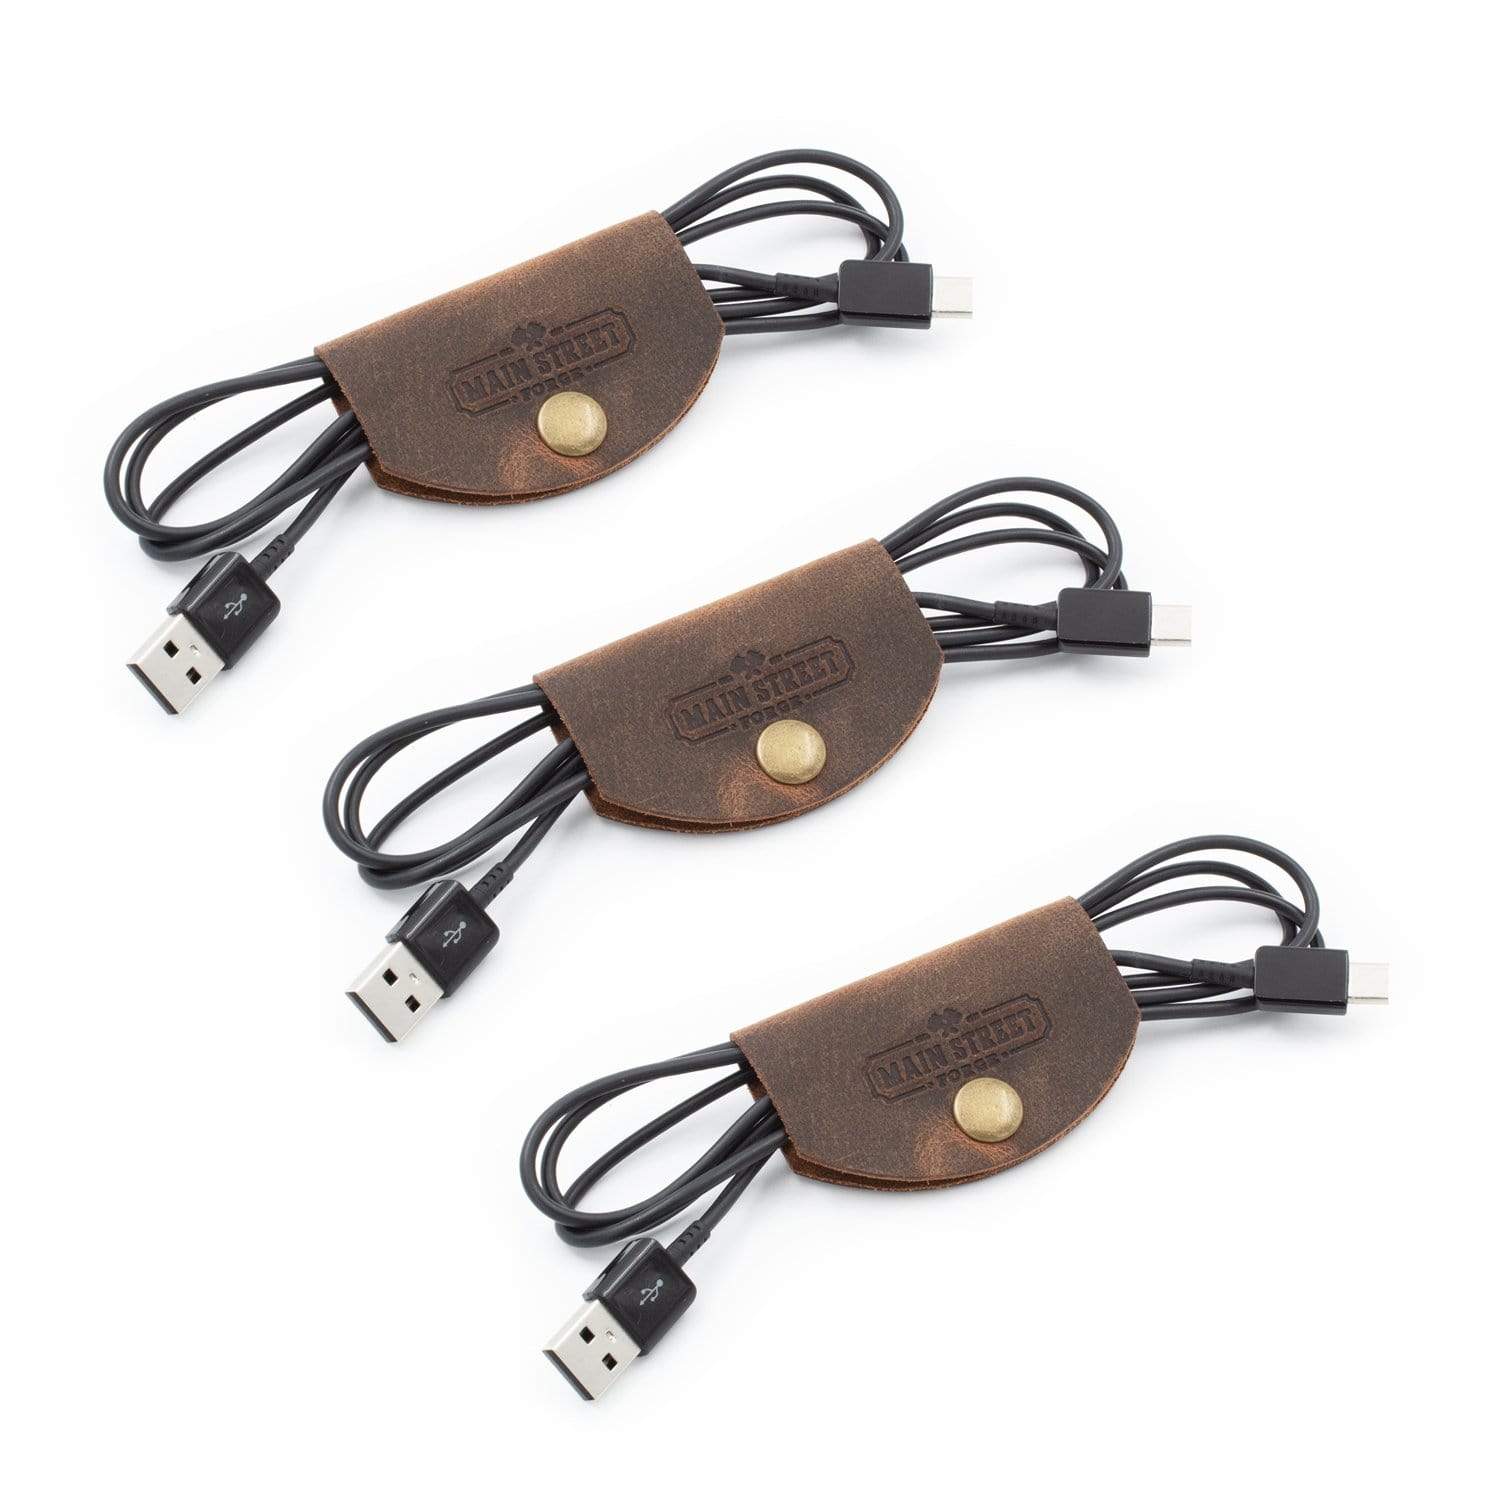 Leather Cord Wraps / Cable Organizers - Main Street Forge